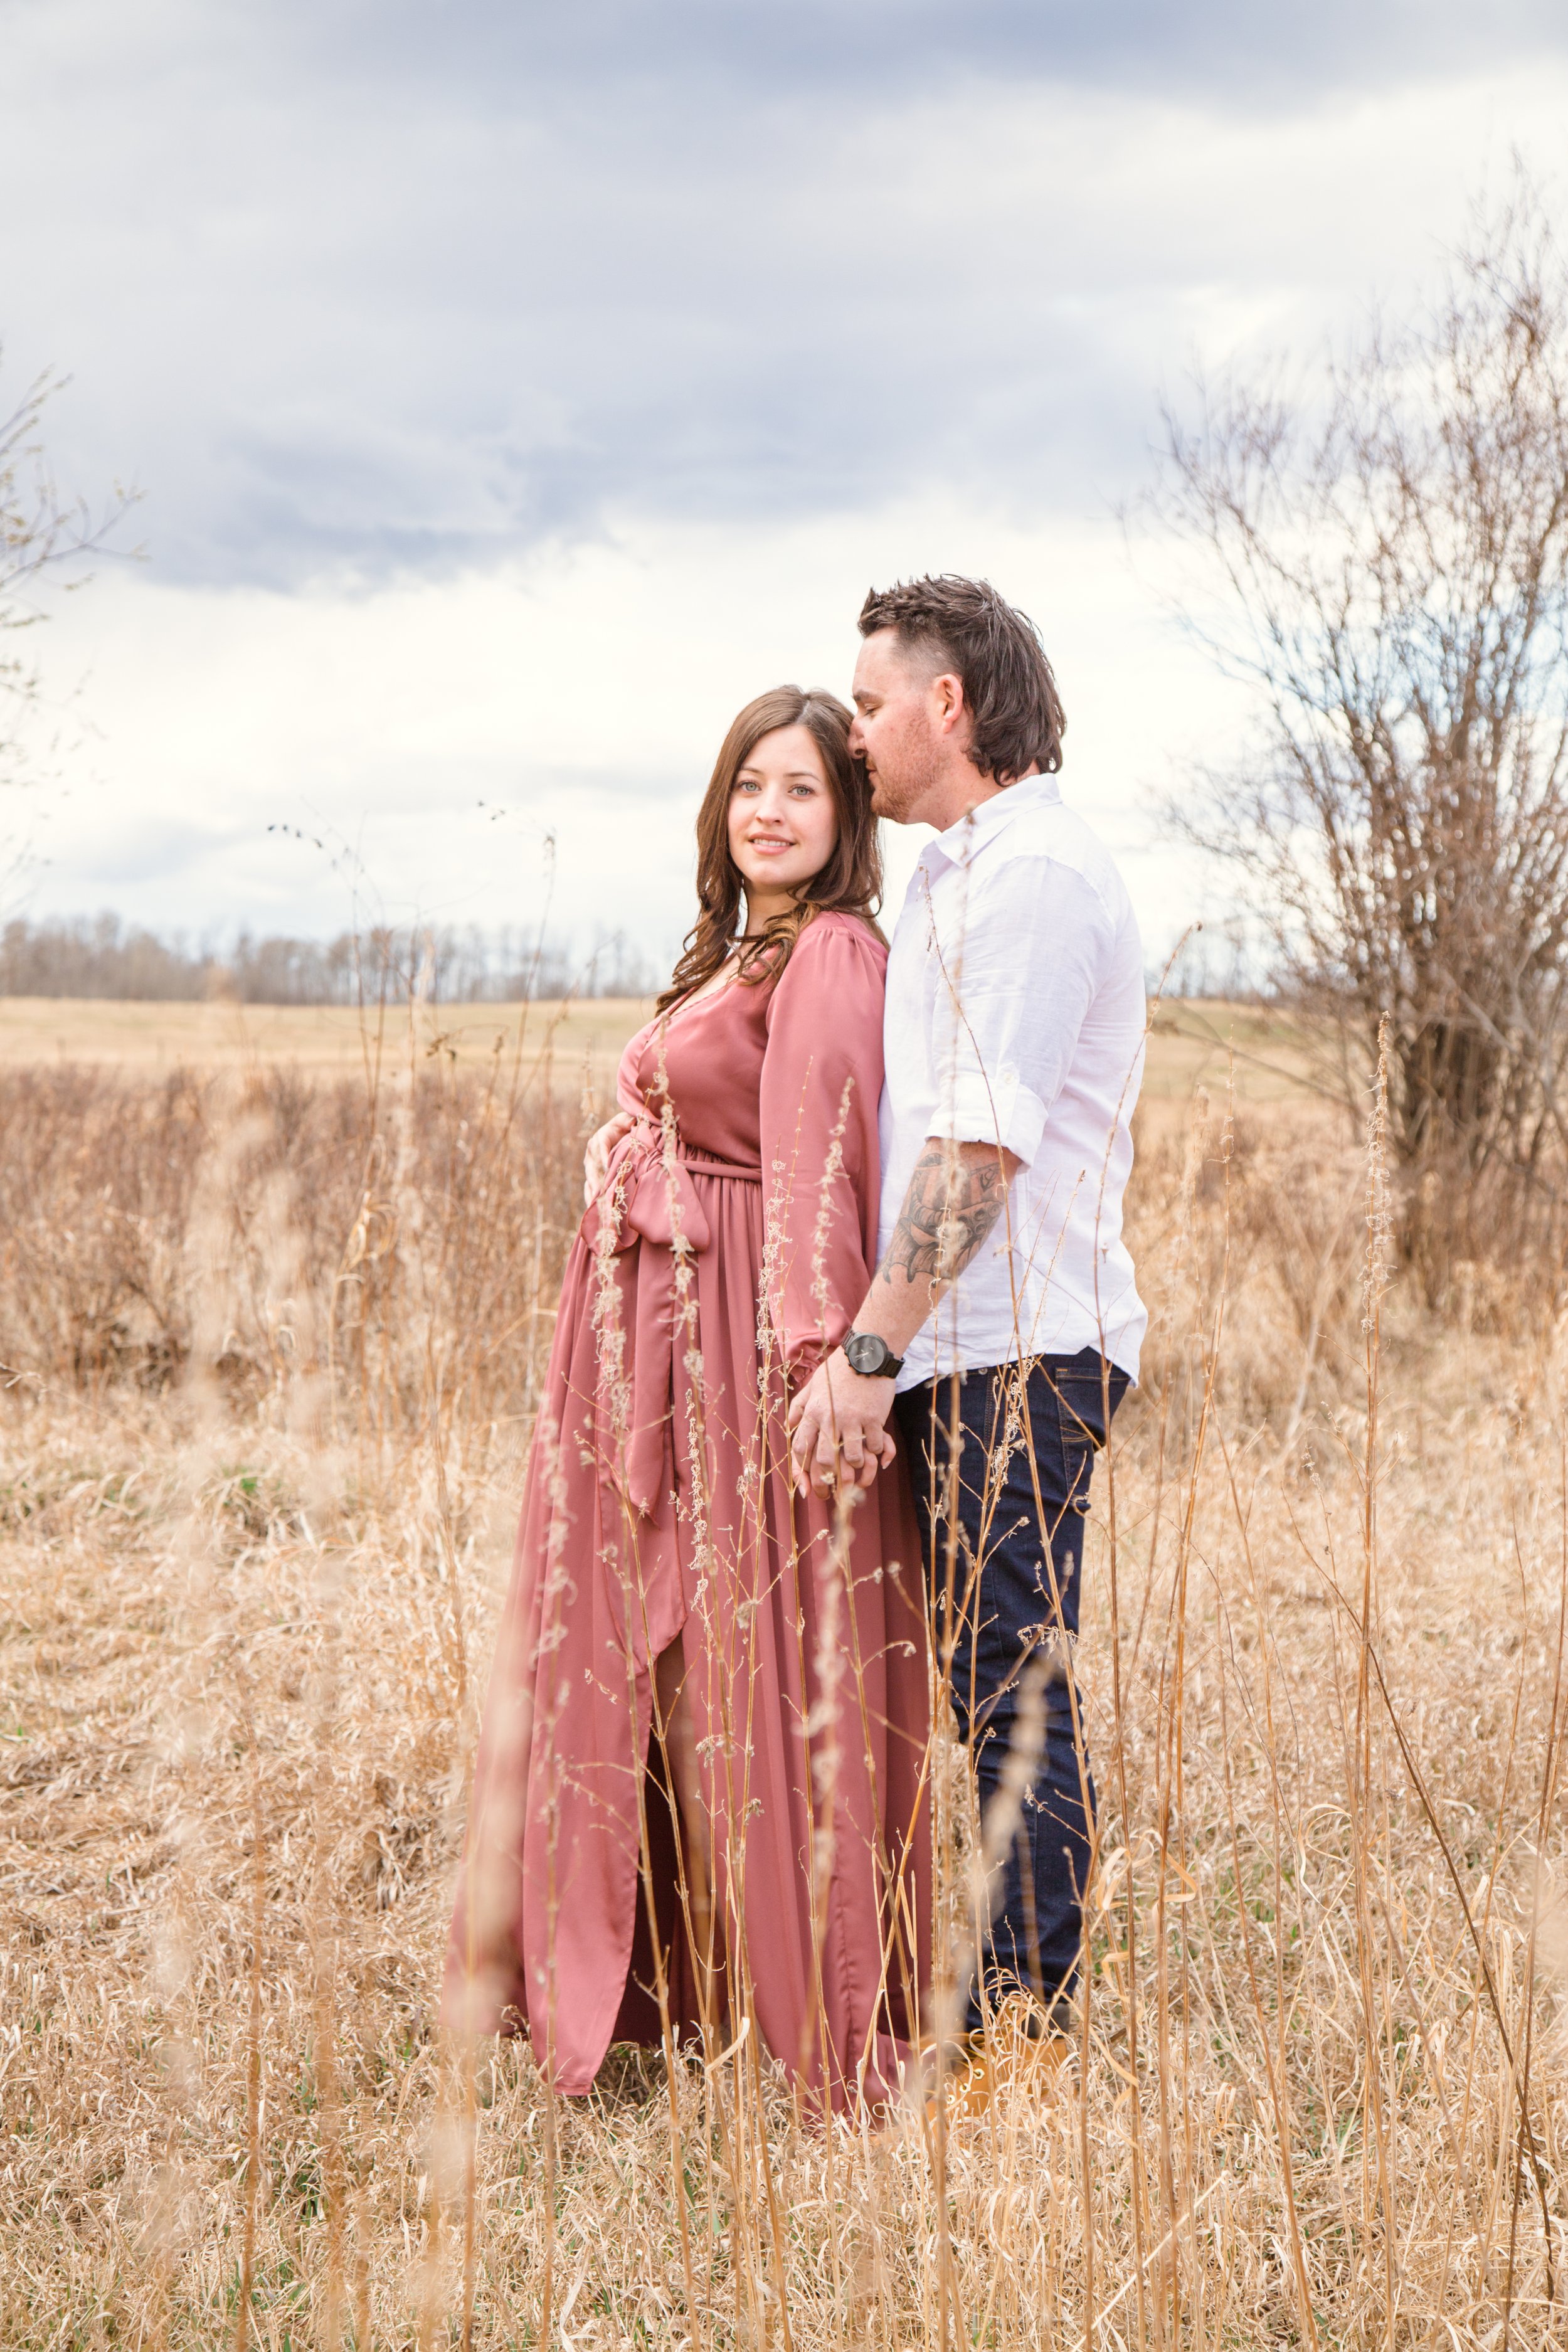  Grande Prairie Maternity Photoshoot couple in a fall field  